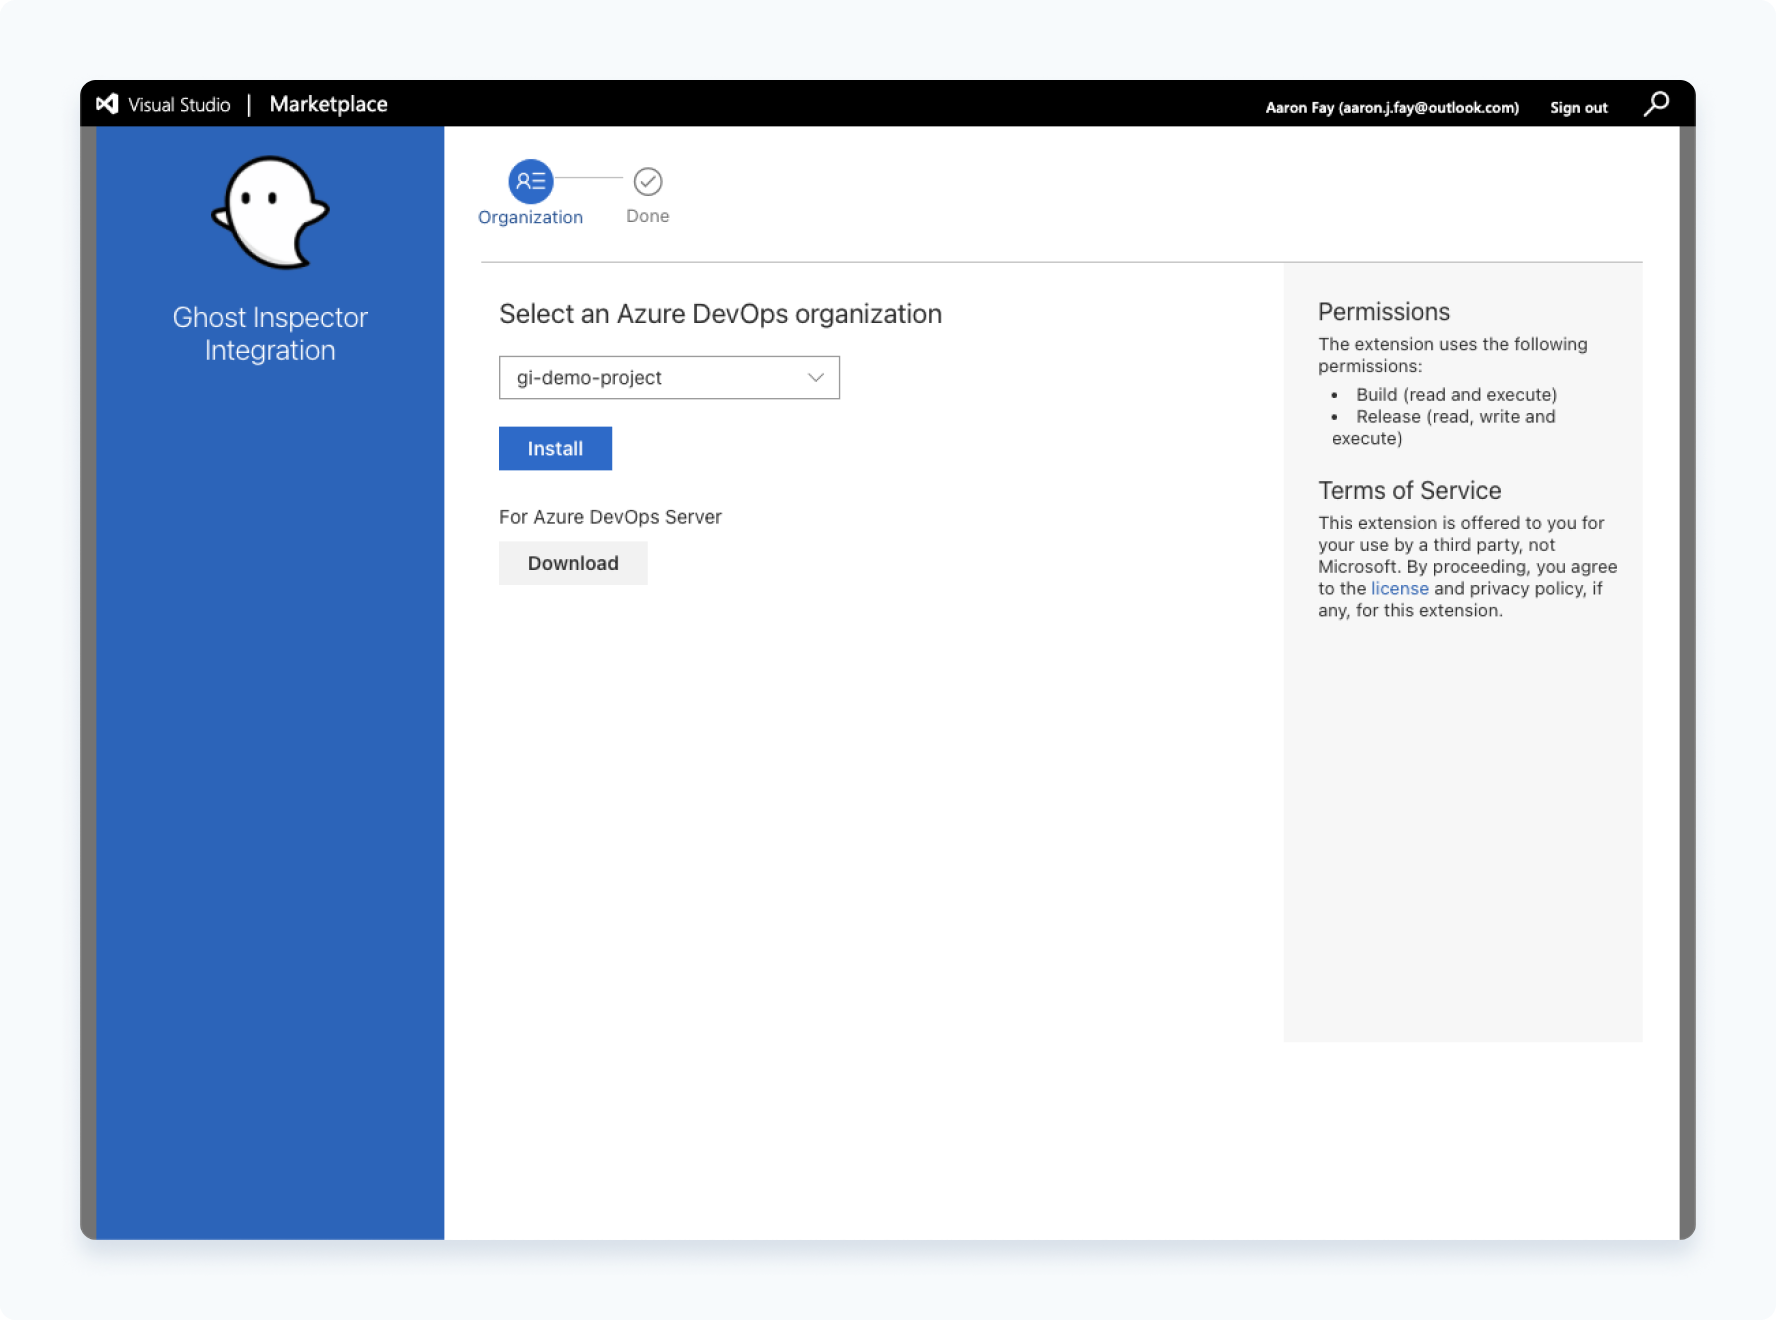 Add Ghost Inspector Integration extension to your Azure DevOps account